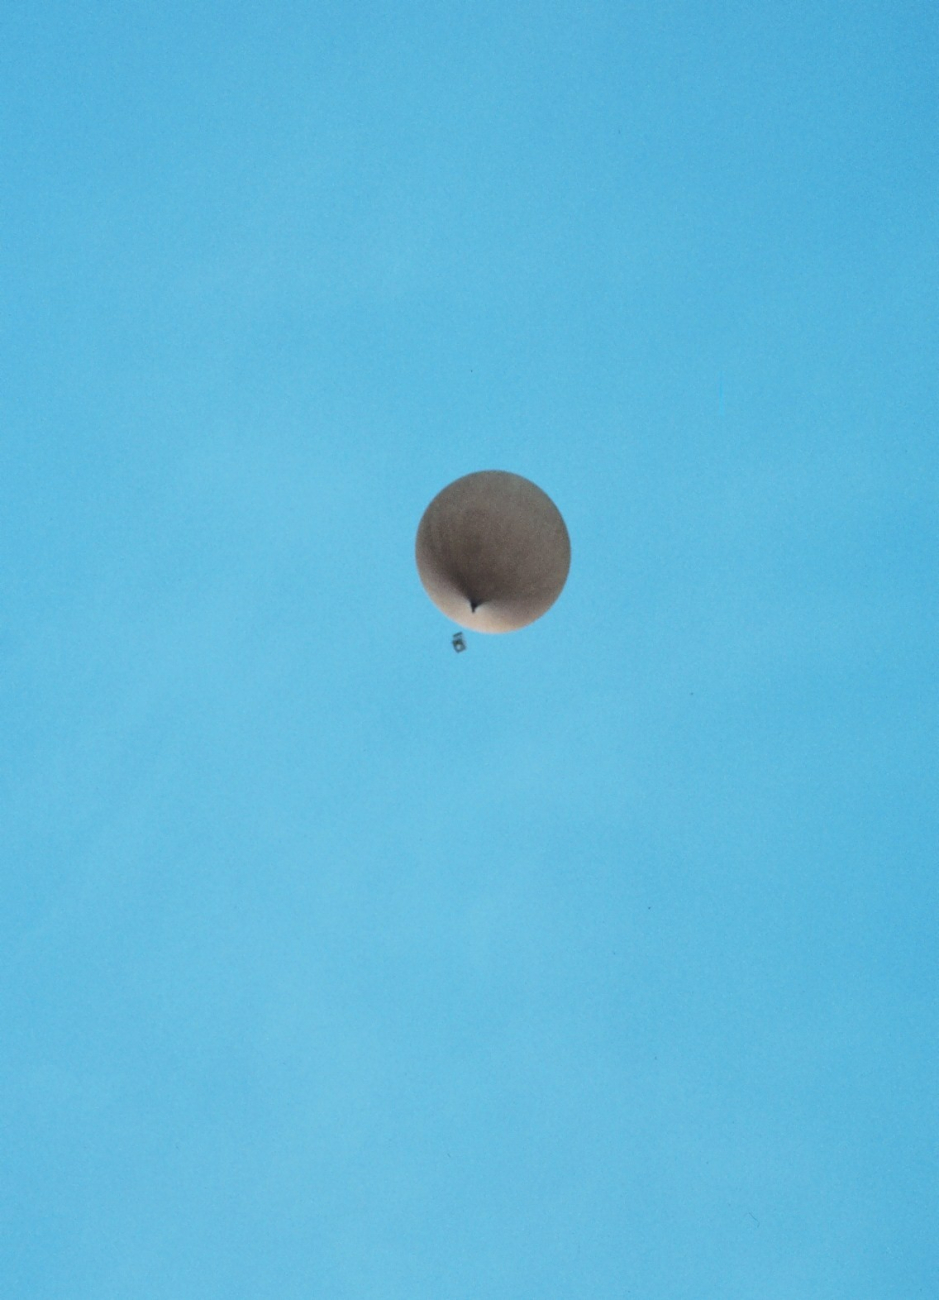 Meteorological balloon with instrument package swinging below at McMurdoStation